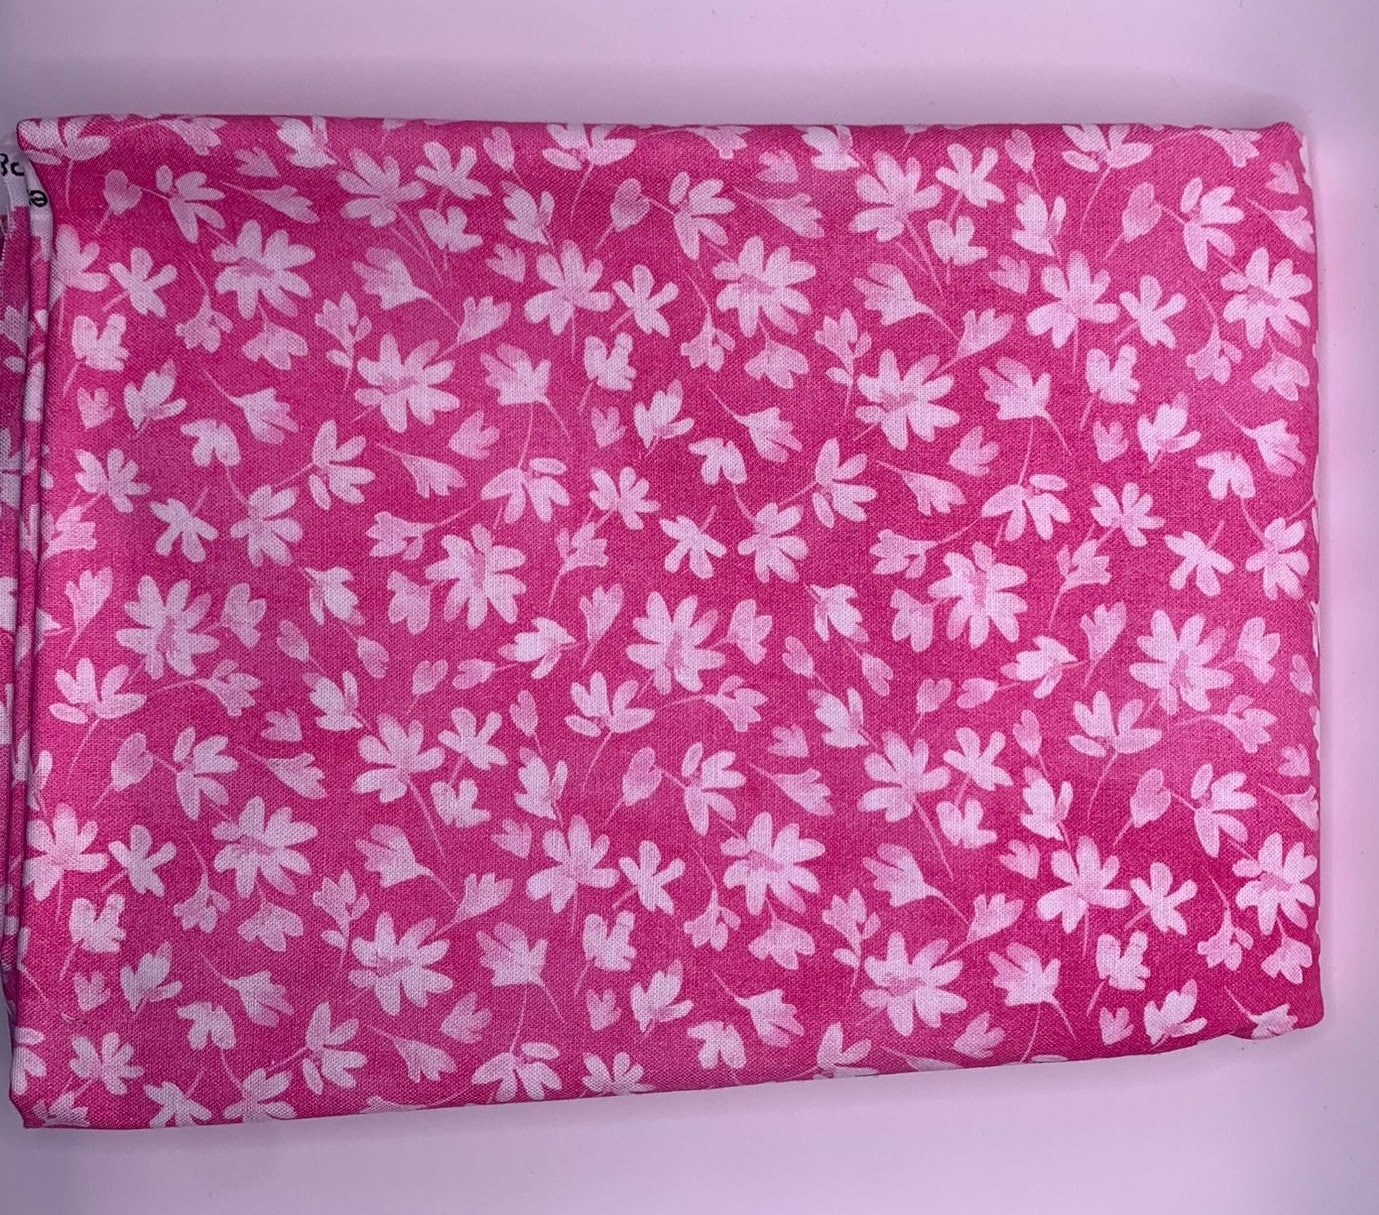 Quilt Fabric- Hand Cut -Sold by the 1/2 Yard- PB Textiles - Full Bloom - Courtney Morganstern - DSN #04650 - Pink -100% Cotton Fabric